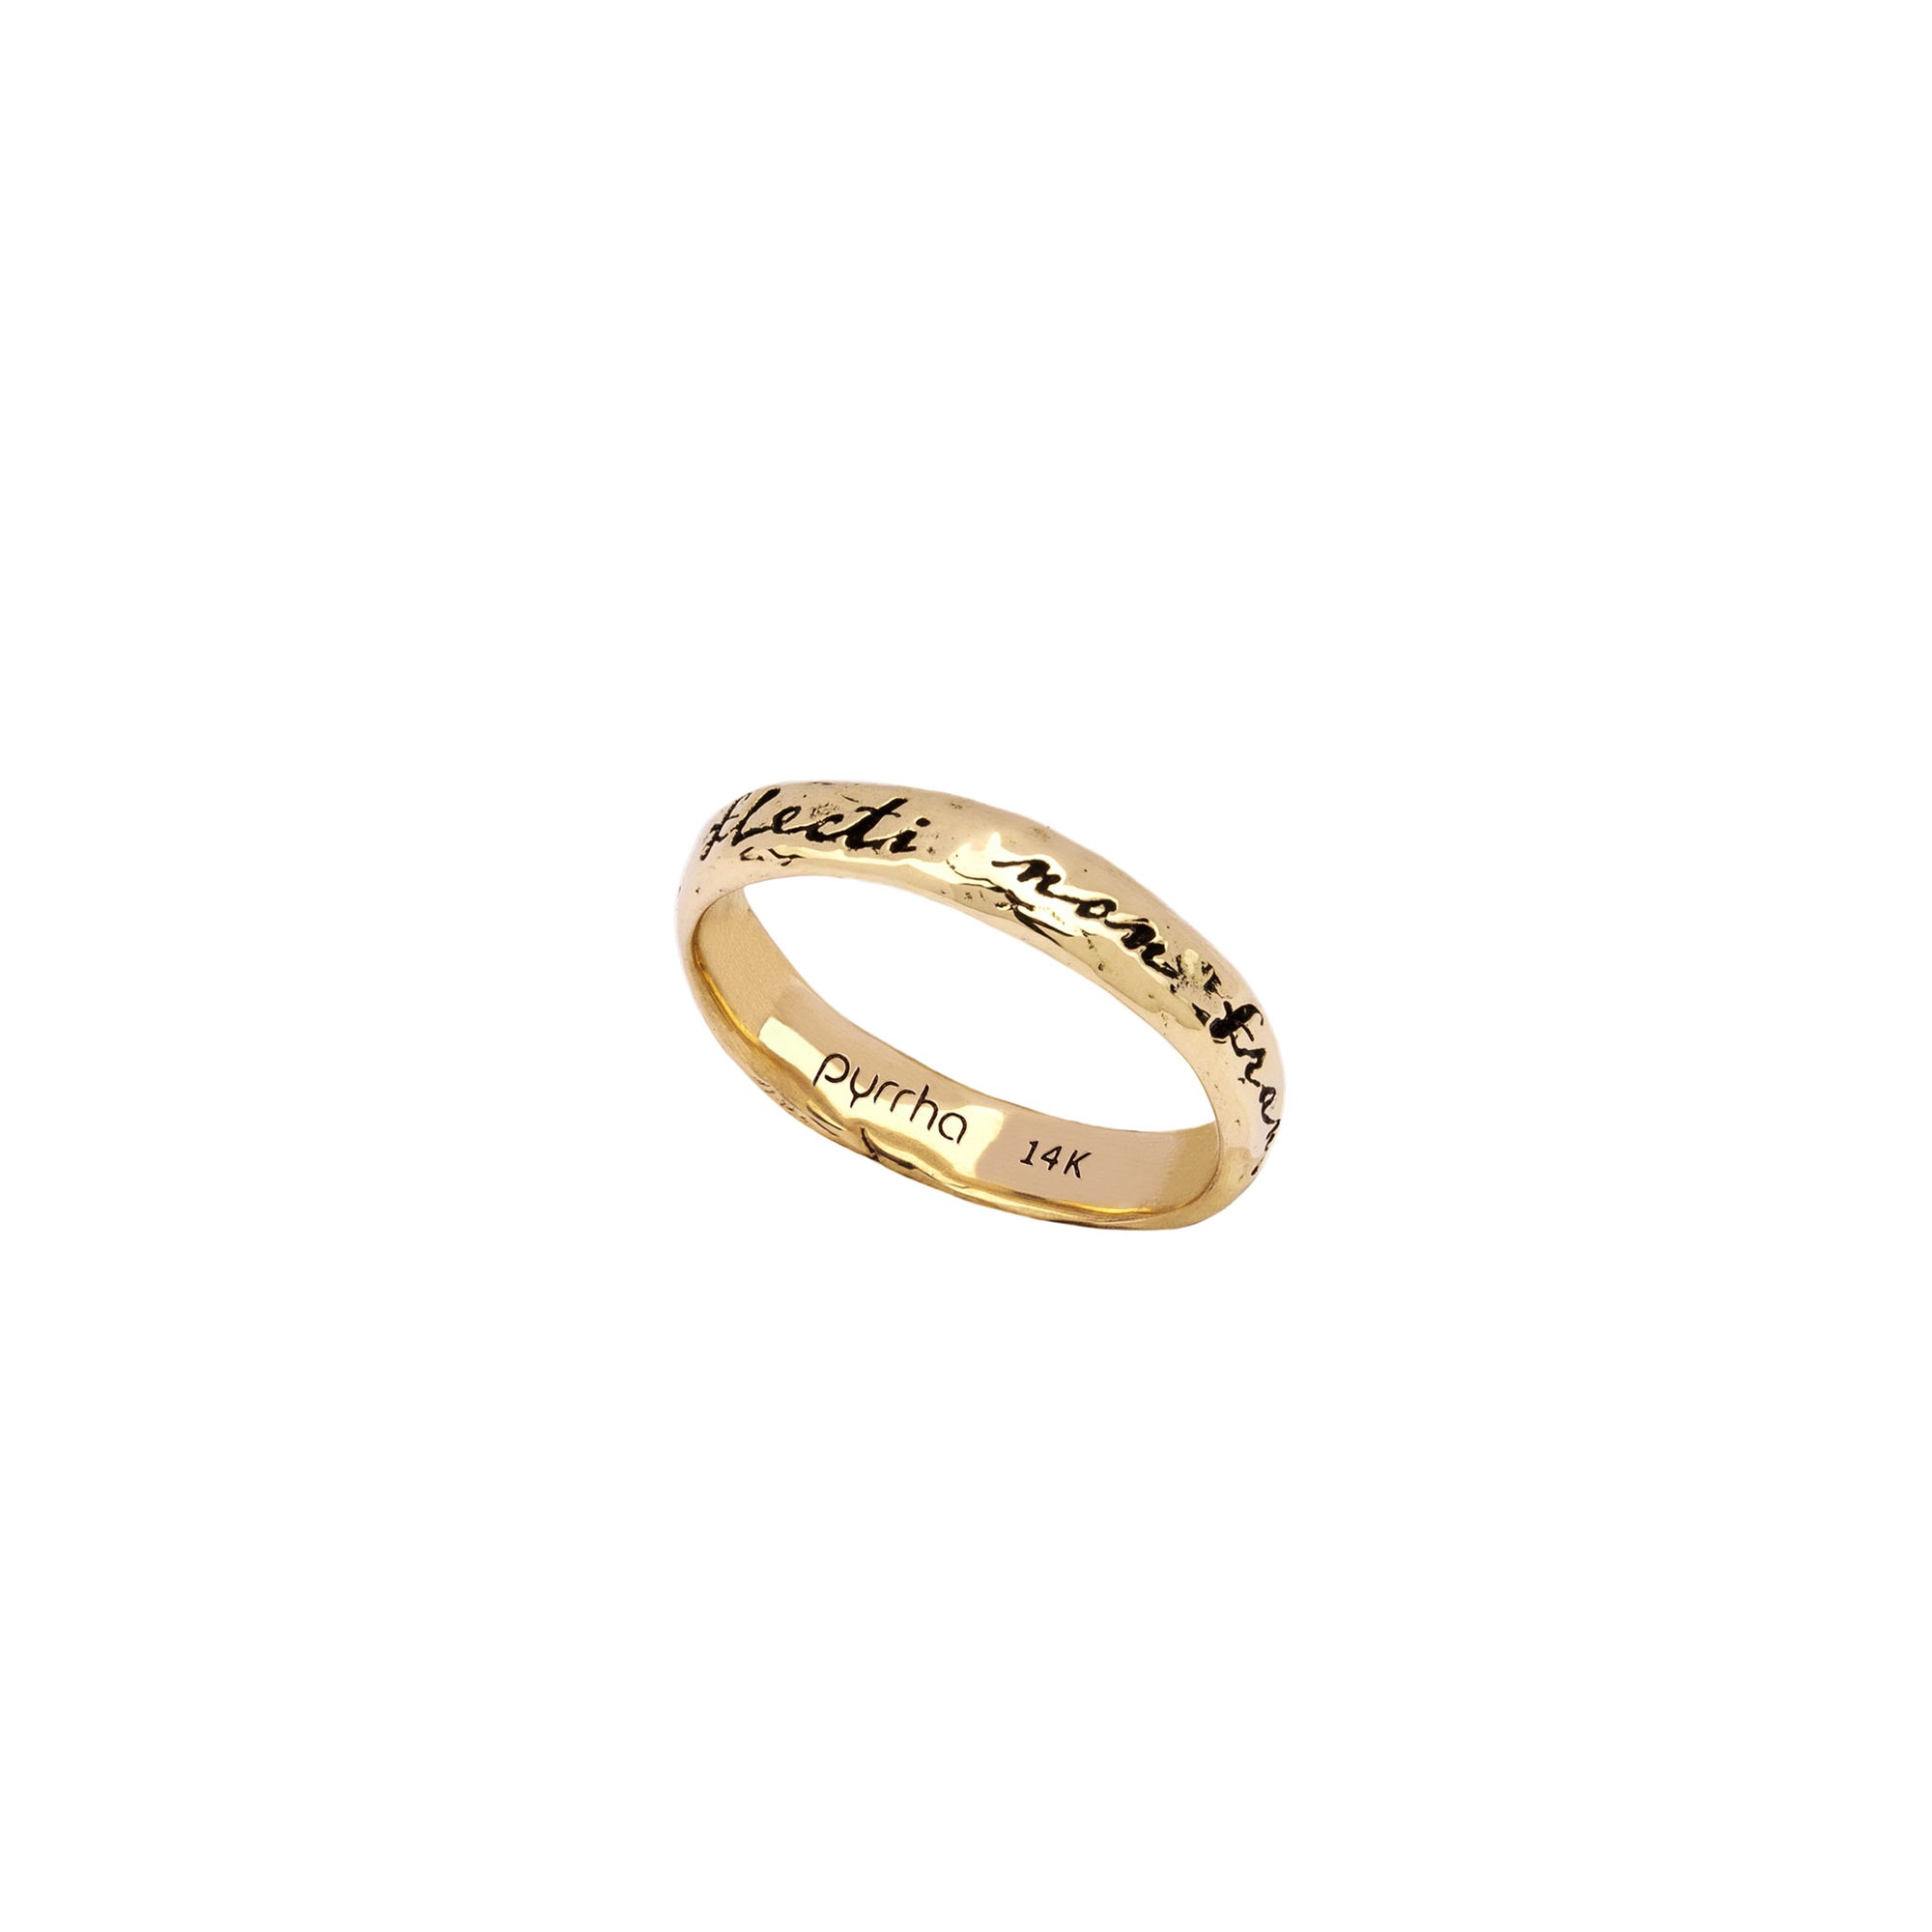 A 14k gold ring engraved with our To Be Bent Not Broken motto.